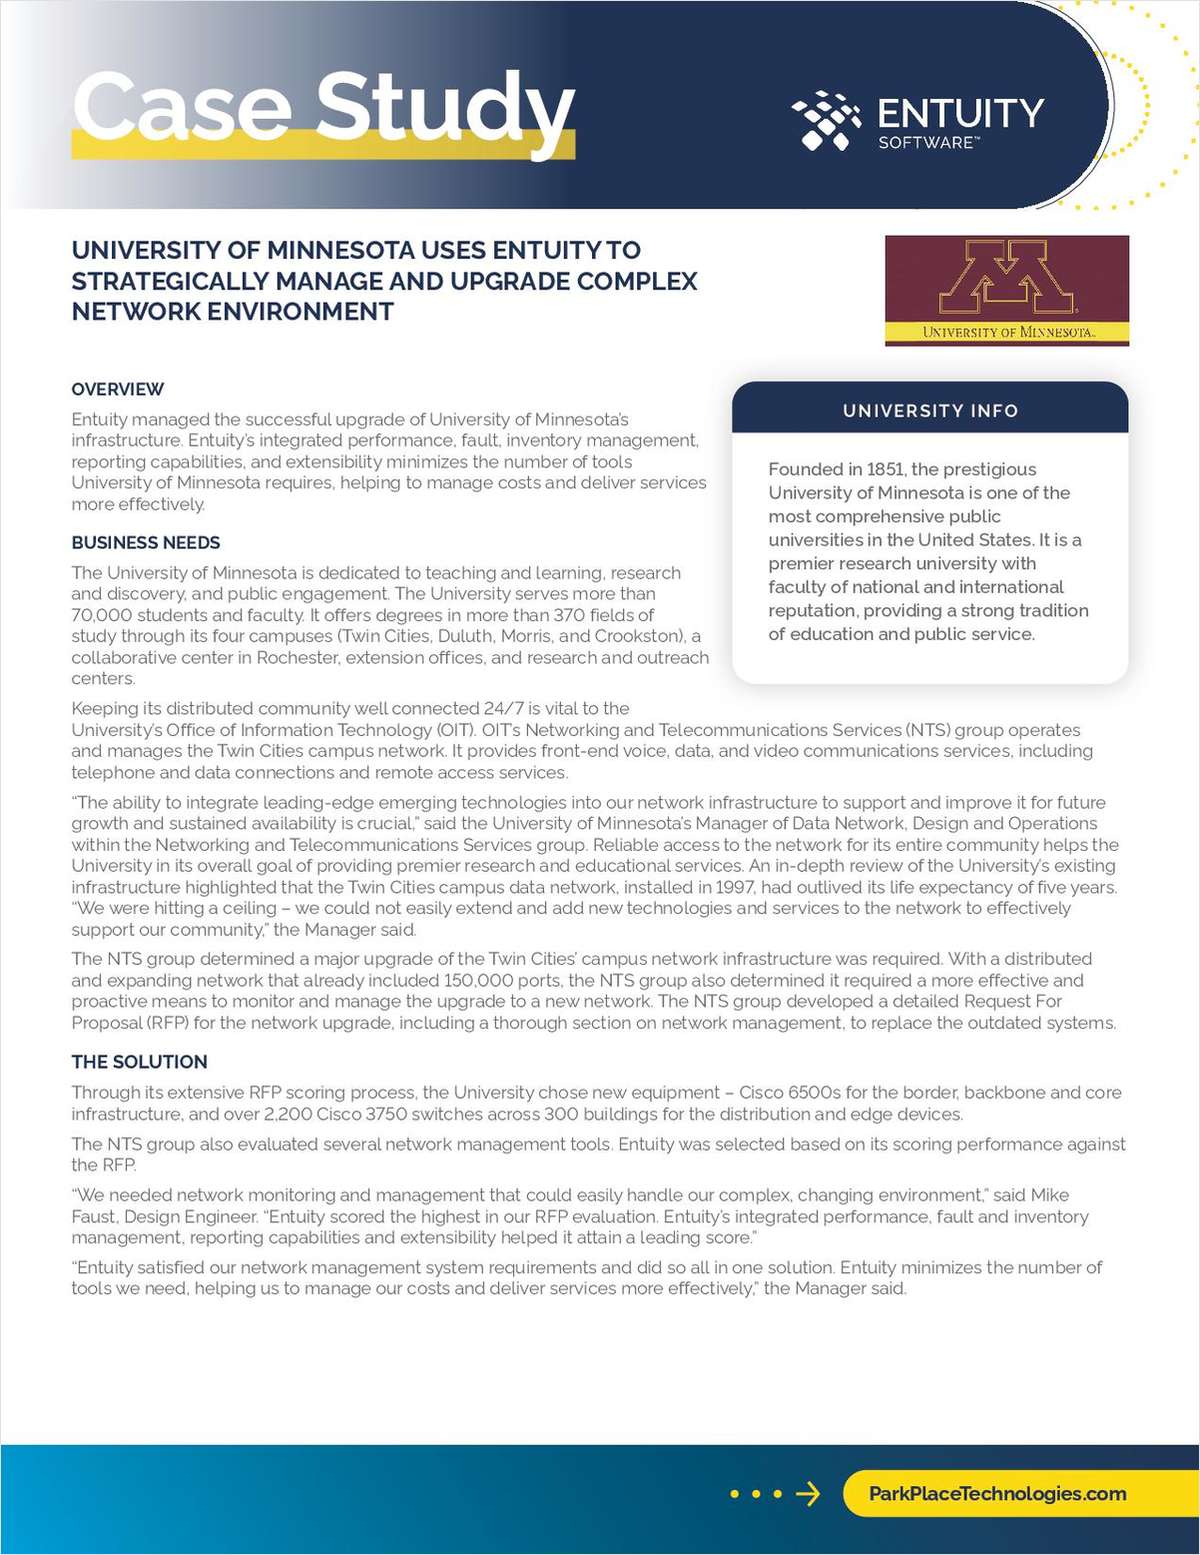 University of Minnesota Uses Entuity to Strategically Manage and Upgrade Complex Network Environment